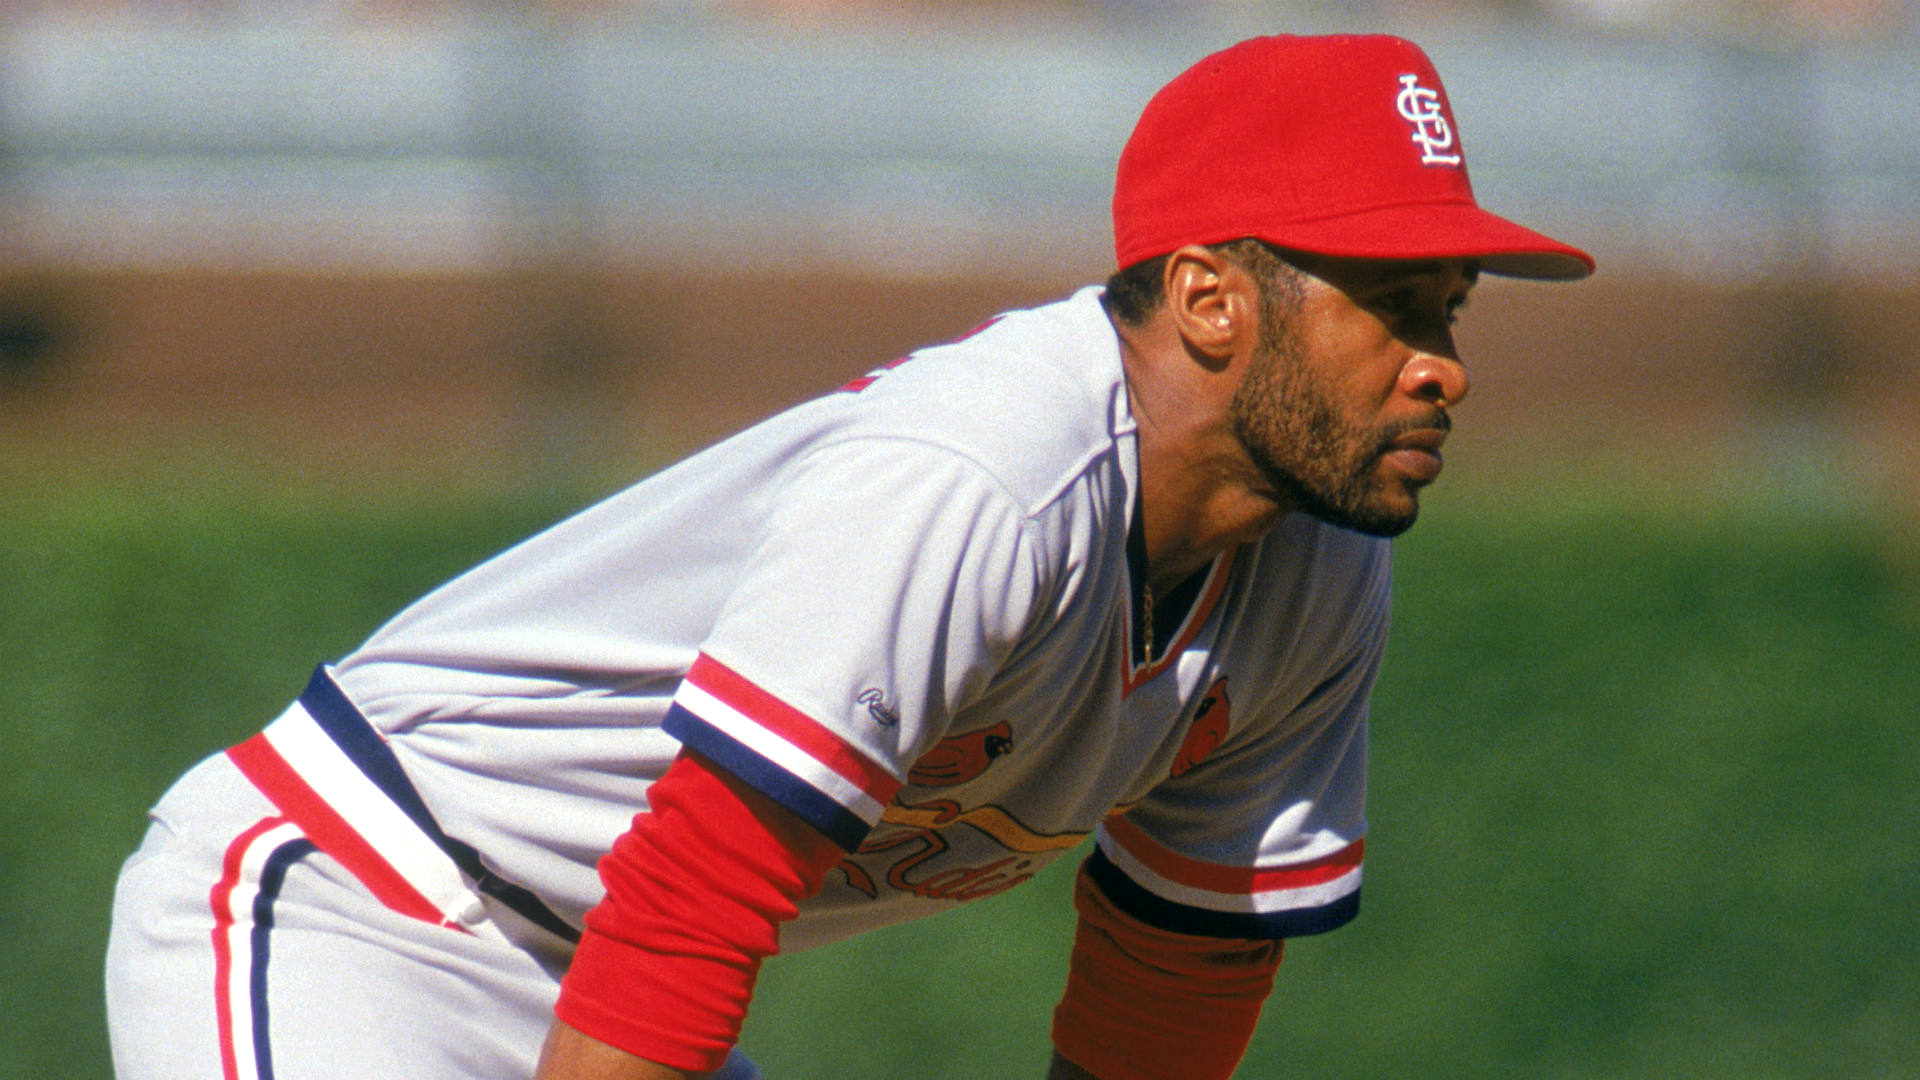 Ozzie Smith baffled by current hitters' approach to shifts.